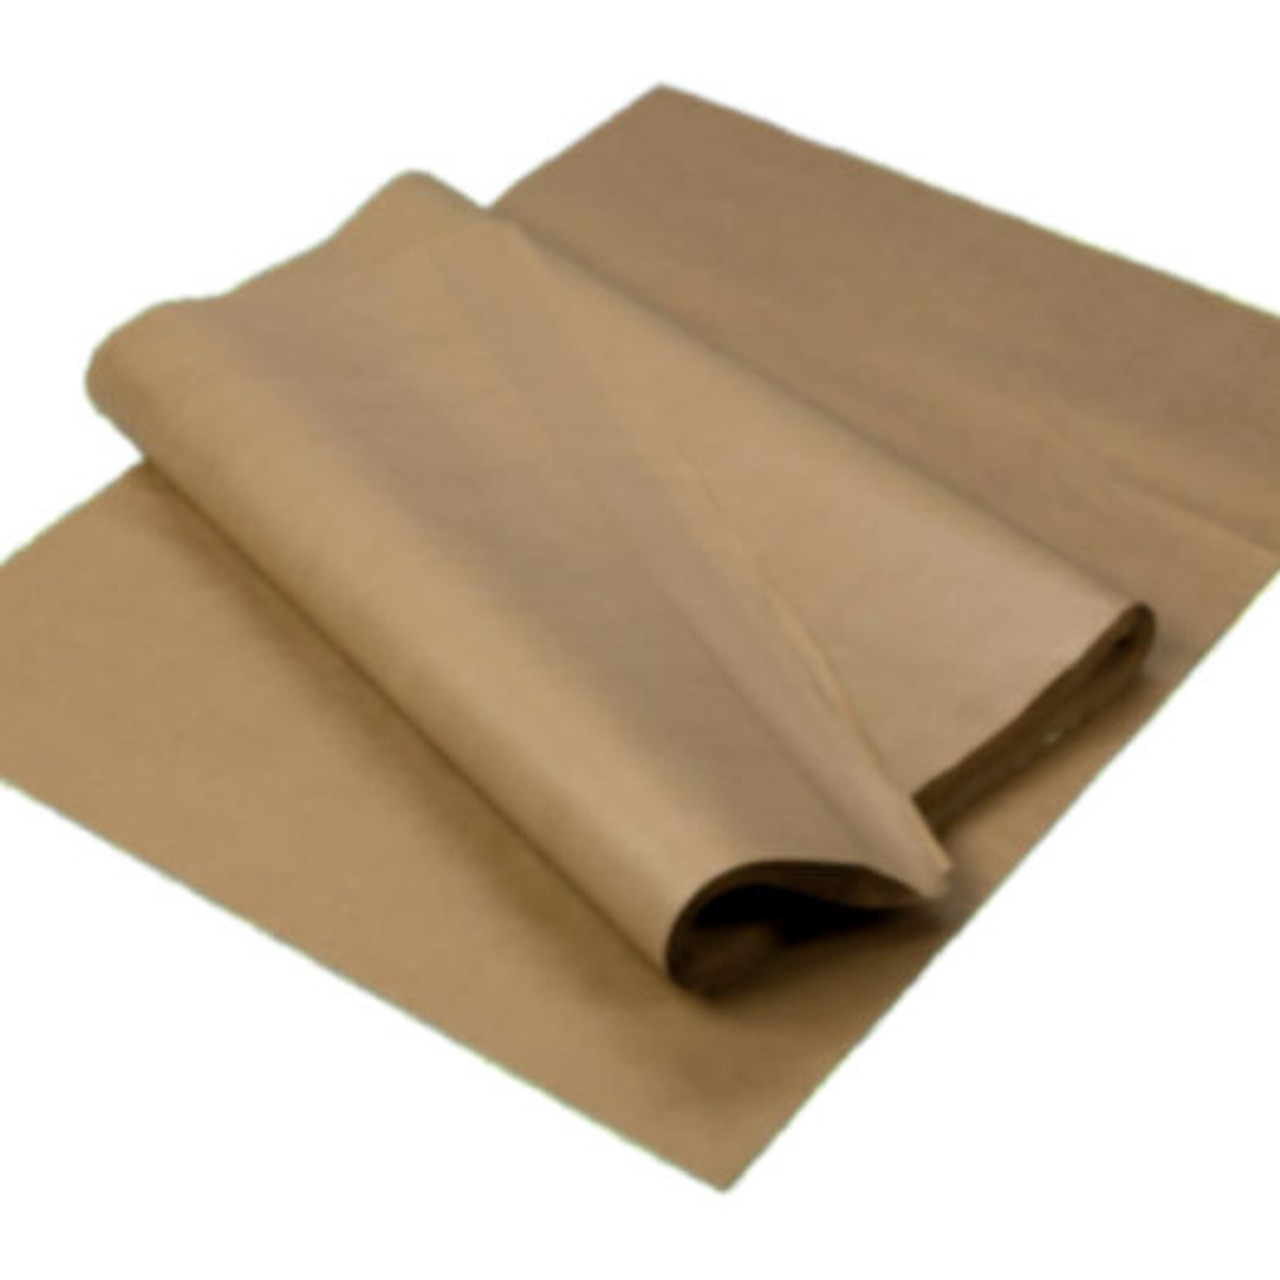 1/2 REAM ( 240 sheets ) 36 x 45 70gsm Pure kraft wrapping paper